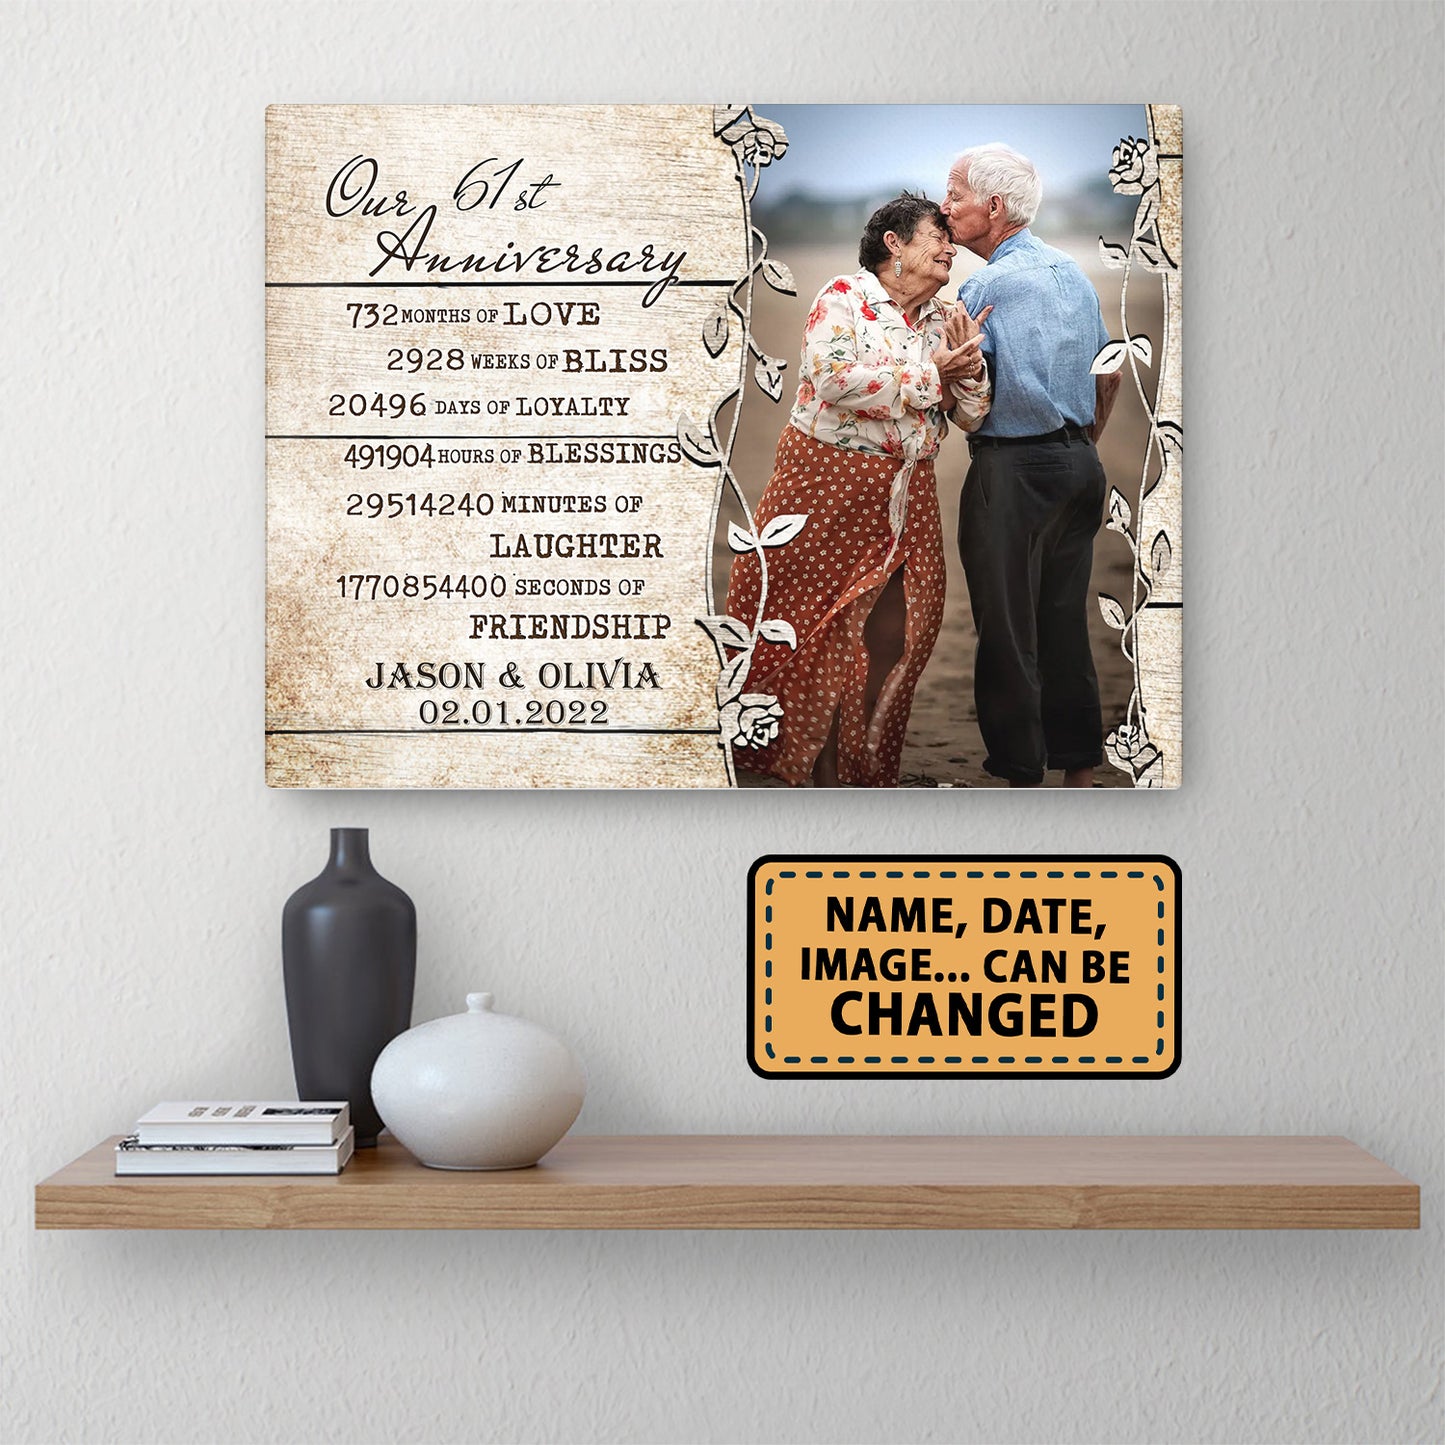 Our 61st Anniversary Timeless love Valentine Gift Personalized Canvas